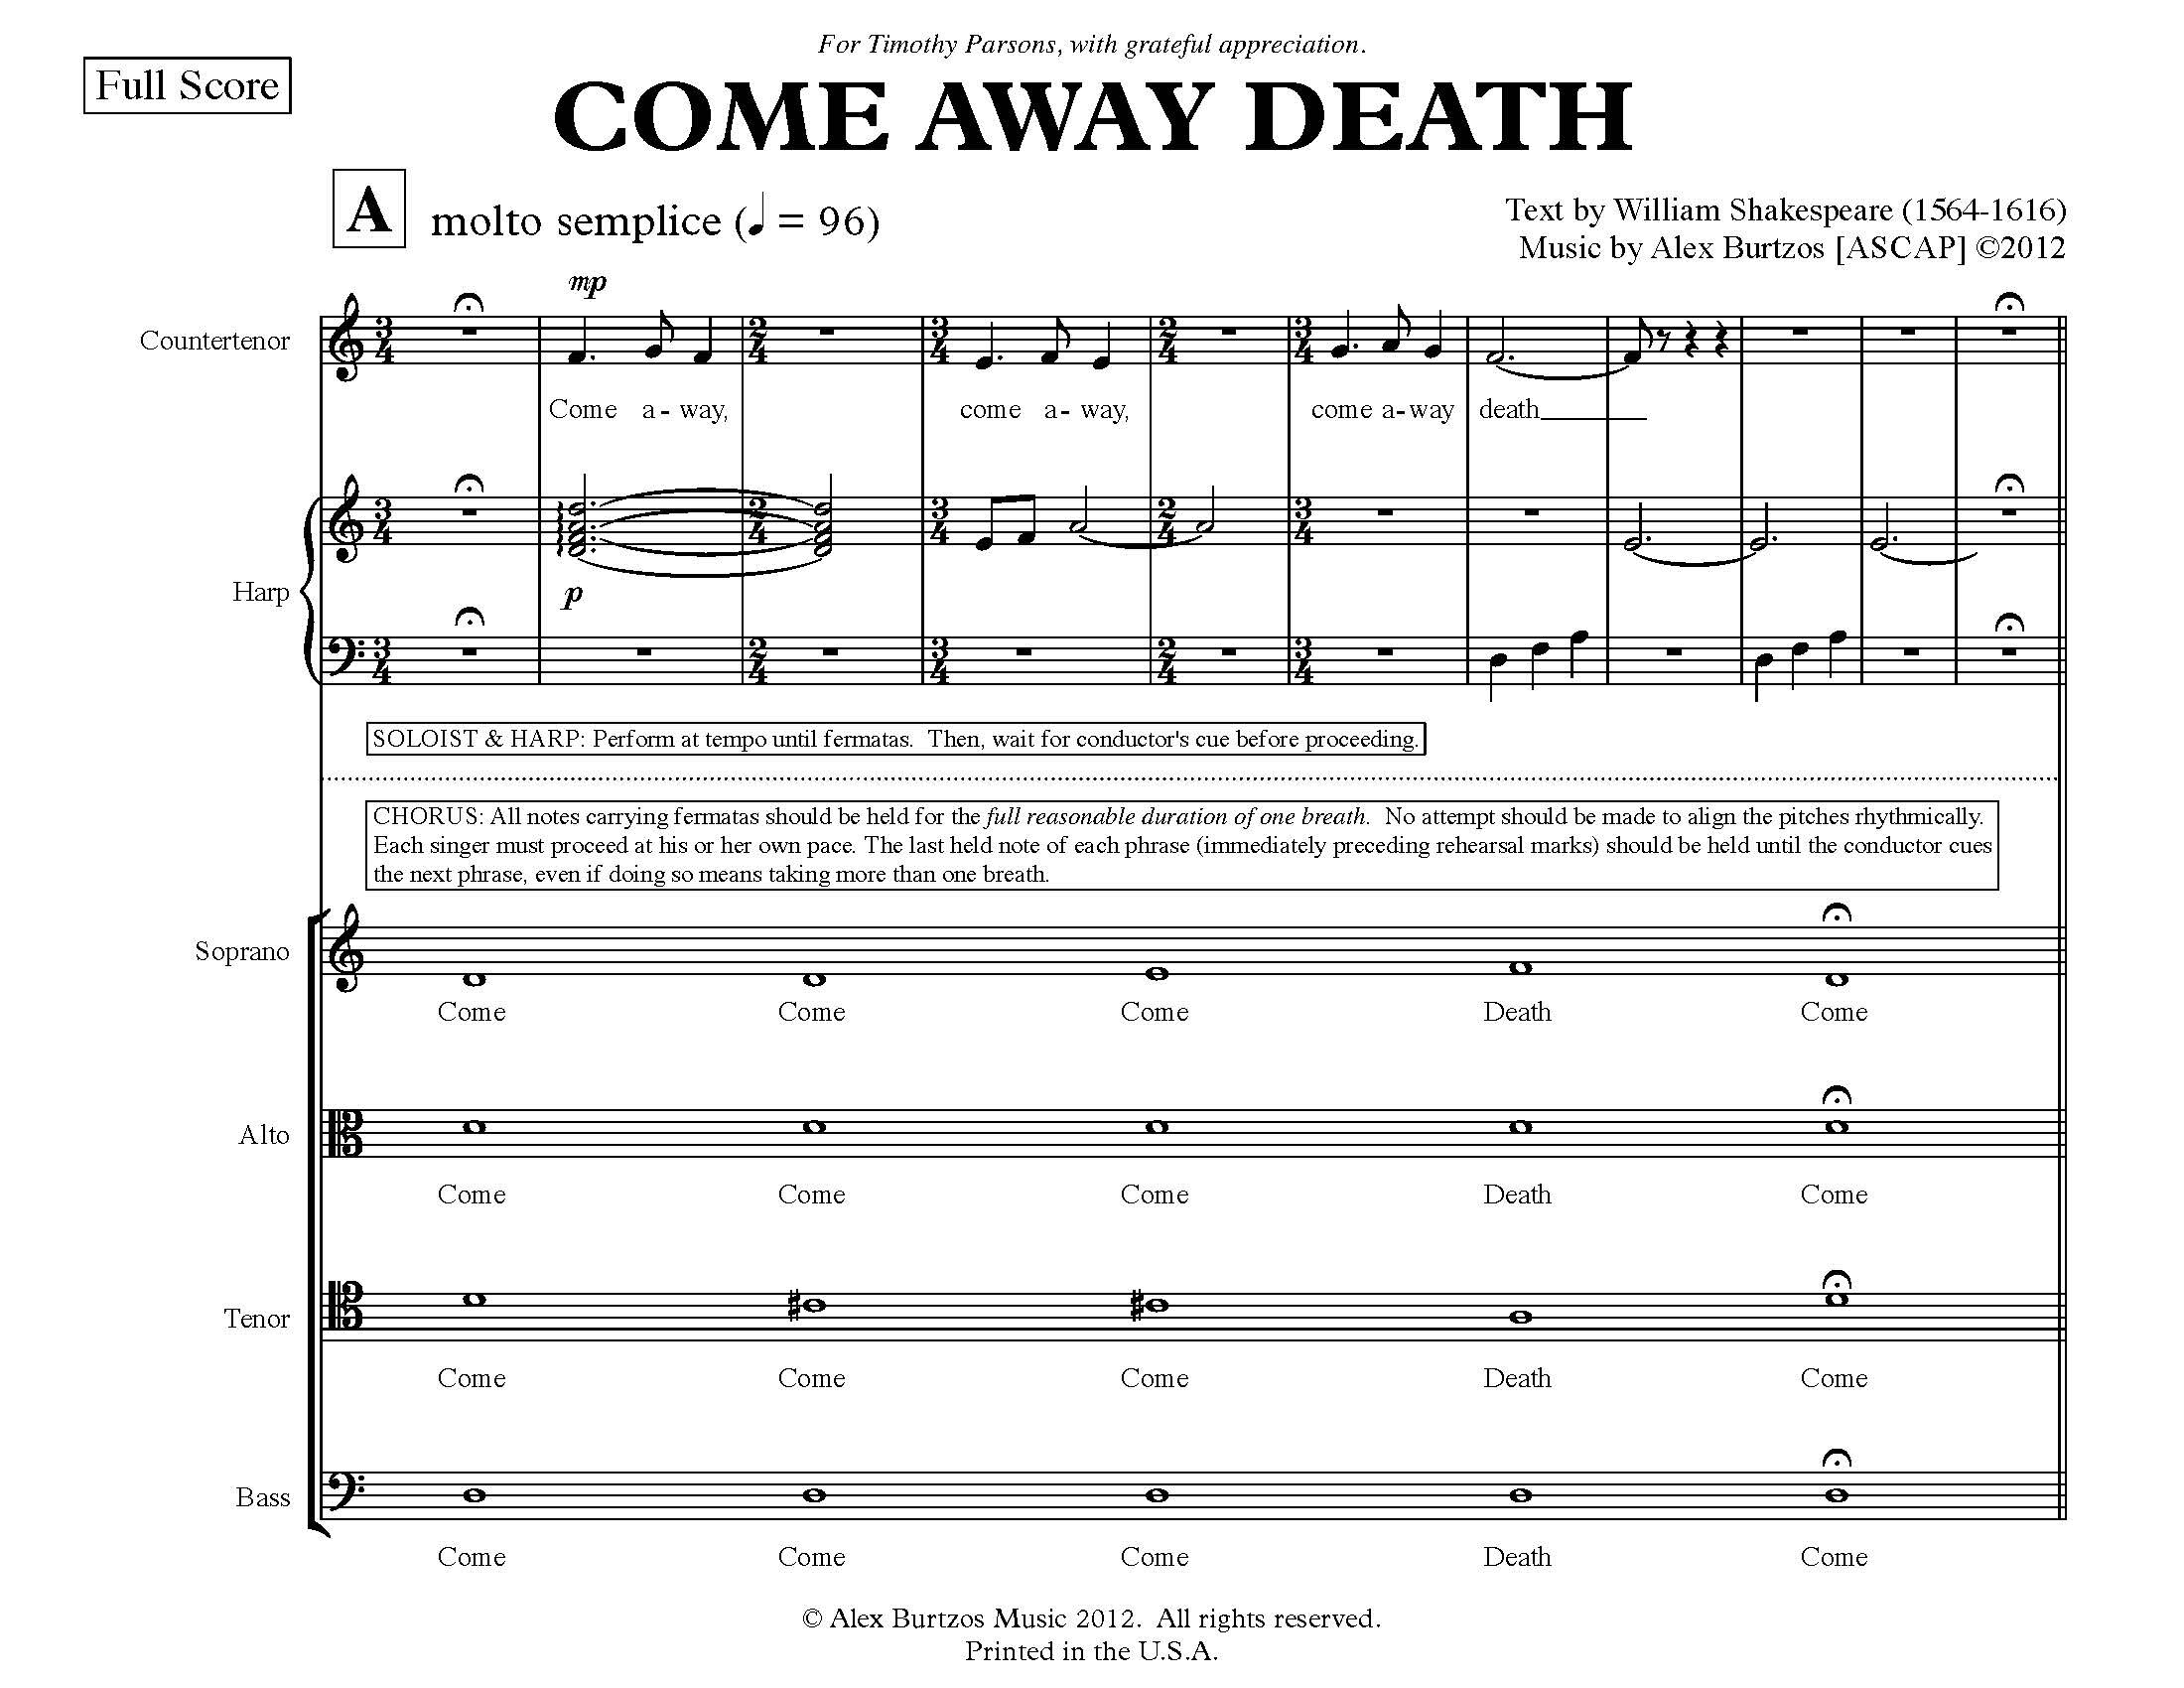 Come Away Death - Complete Score_Page_07.jpg